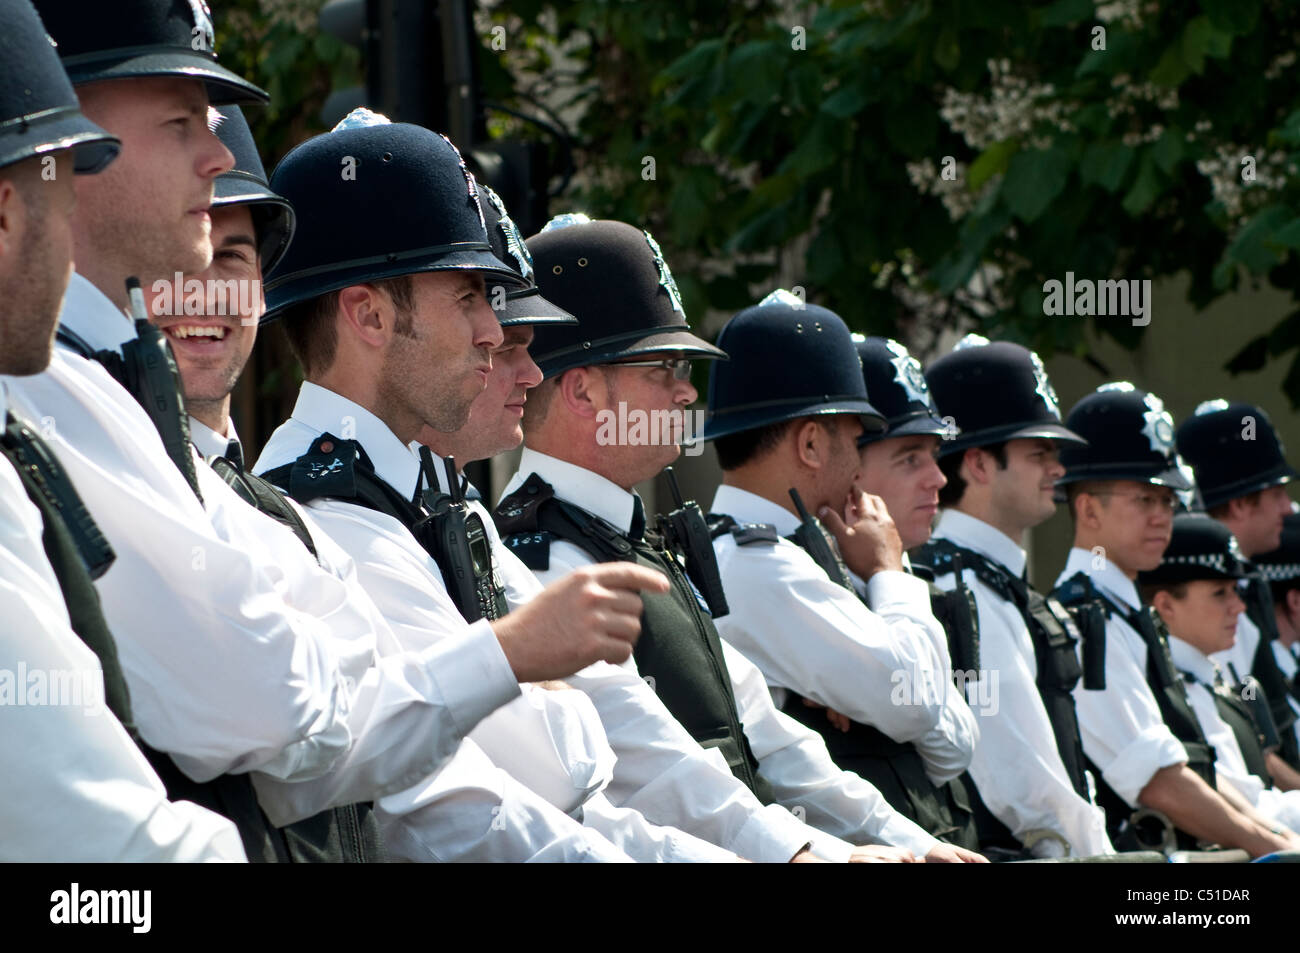 Police line during Public sector pensions strike, London, 30/06/2011, UK Stock Photo